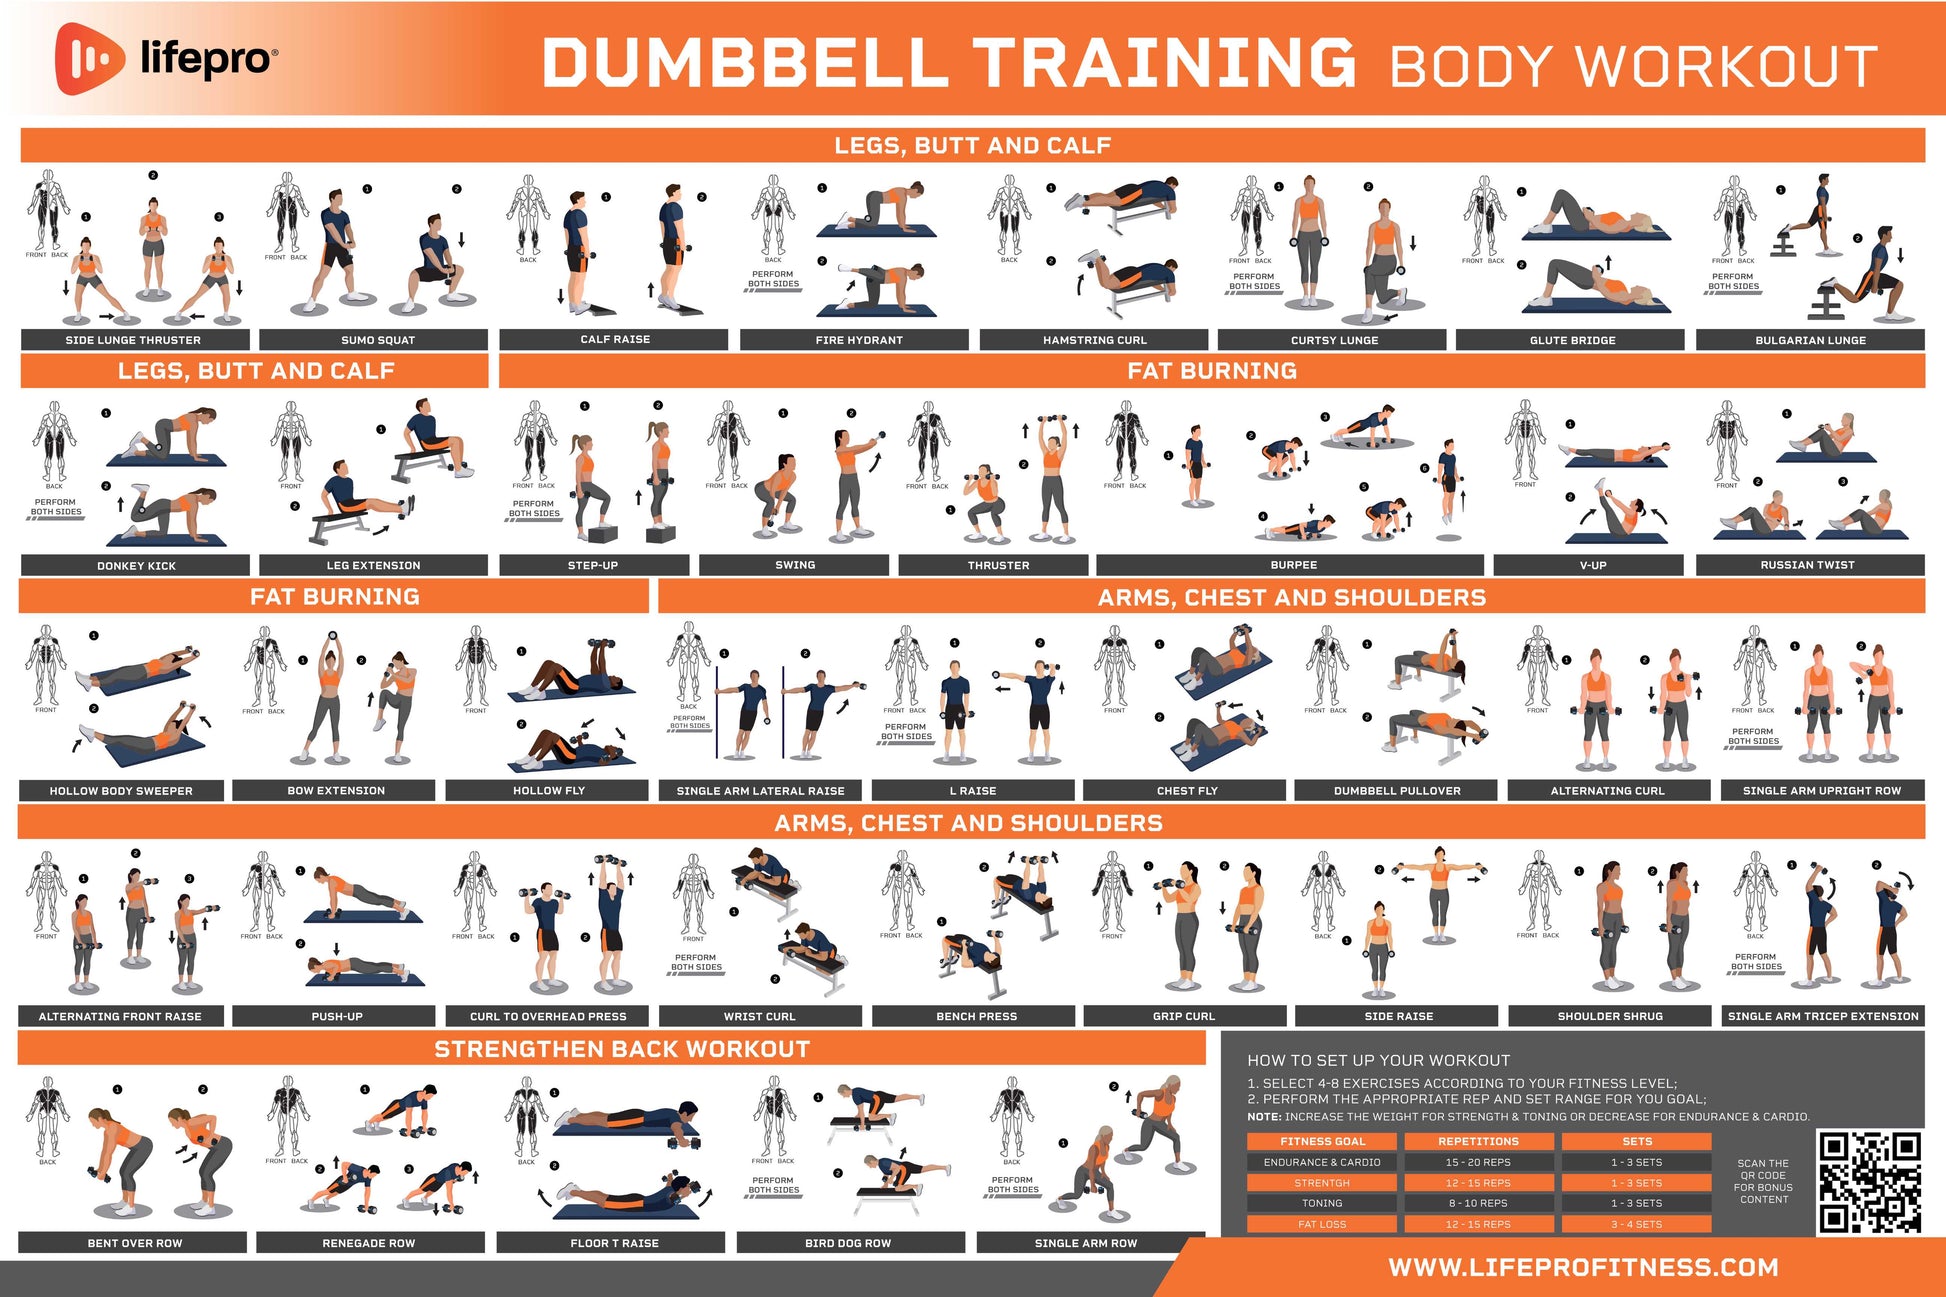 Dumbbell Workout Guide Lifepro